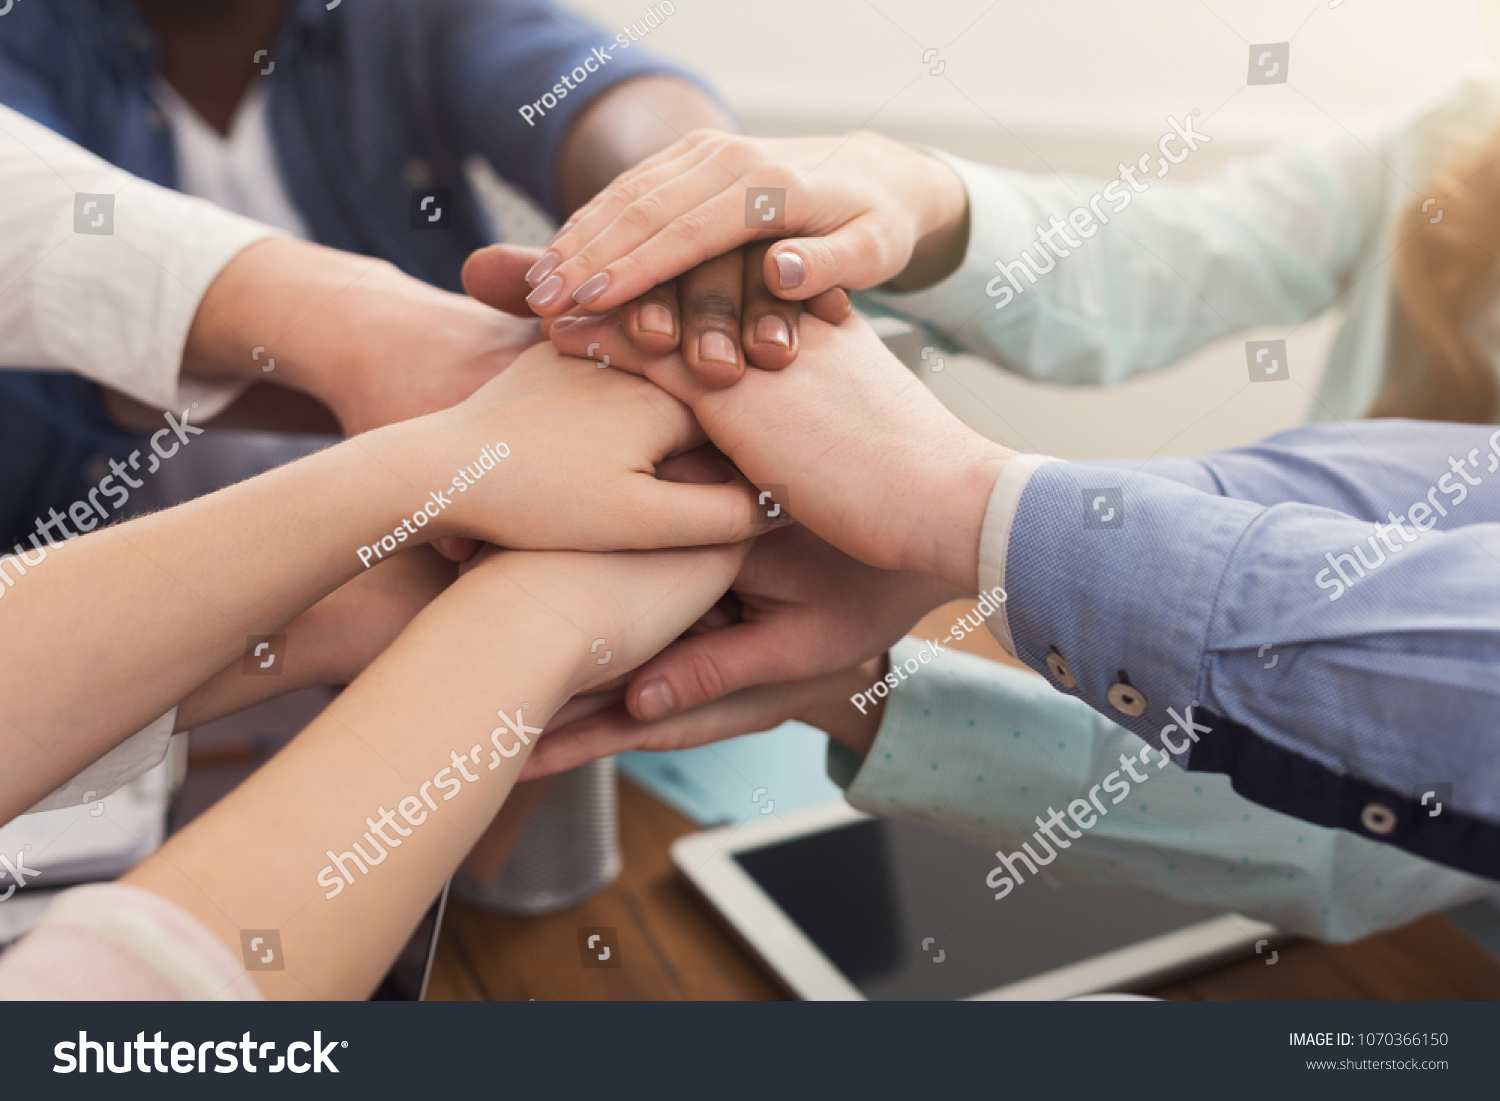 Multiethnic team put hands together, connection, teambuilding and alliance concept. Crop of people in office unite for teamwork and cooperation, copy space #1070366150